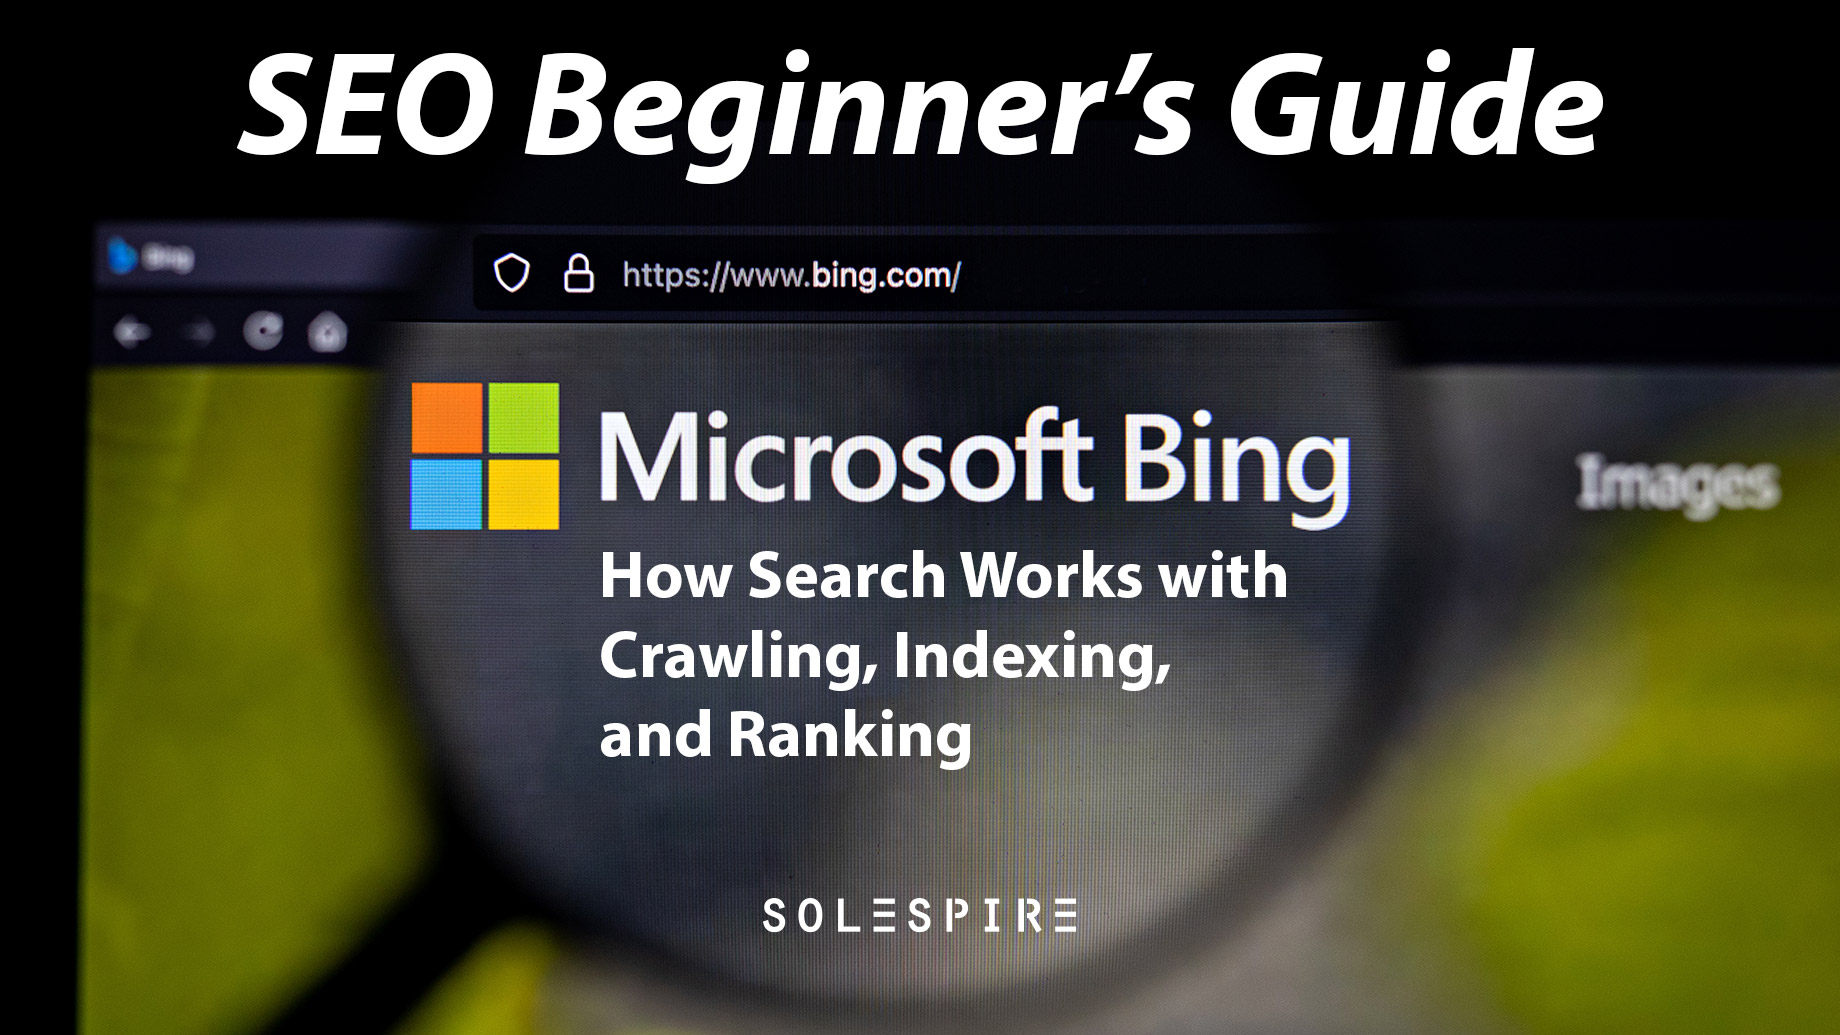 SEO Beginner's Guide: How Bing Search Works With Crawling, Indexing, And Ranking